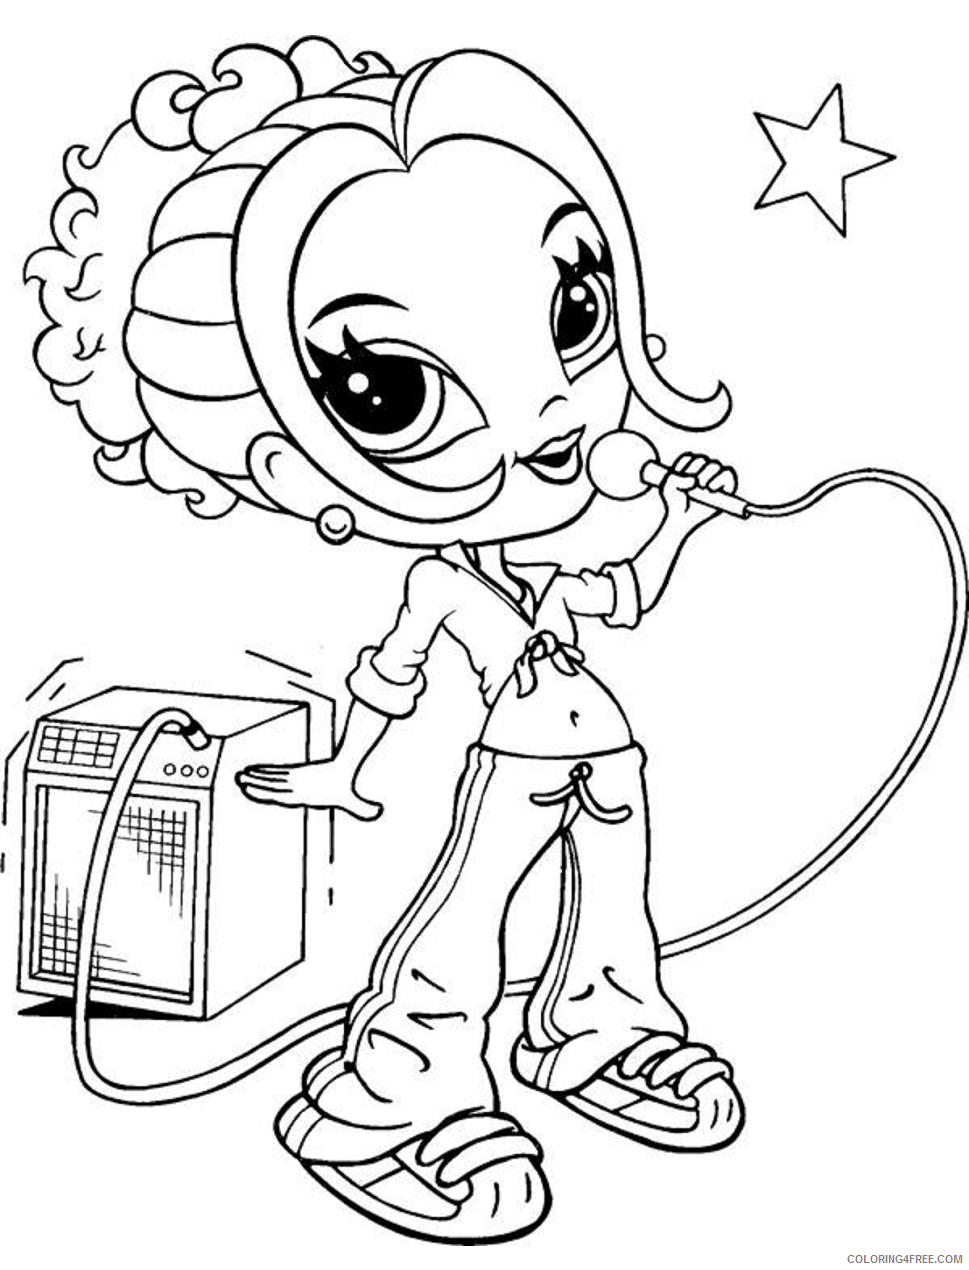 Girl Coloring Pages for Girls glamour_girl_singing Printable 2021 0501 Coloring4free